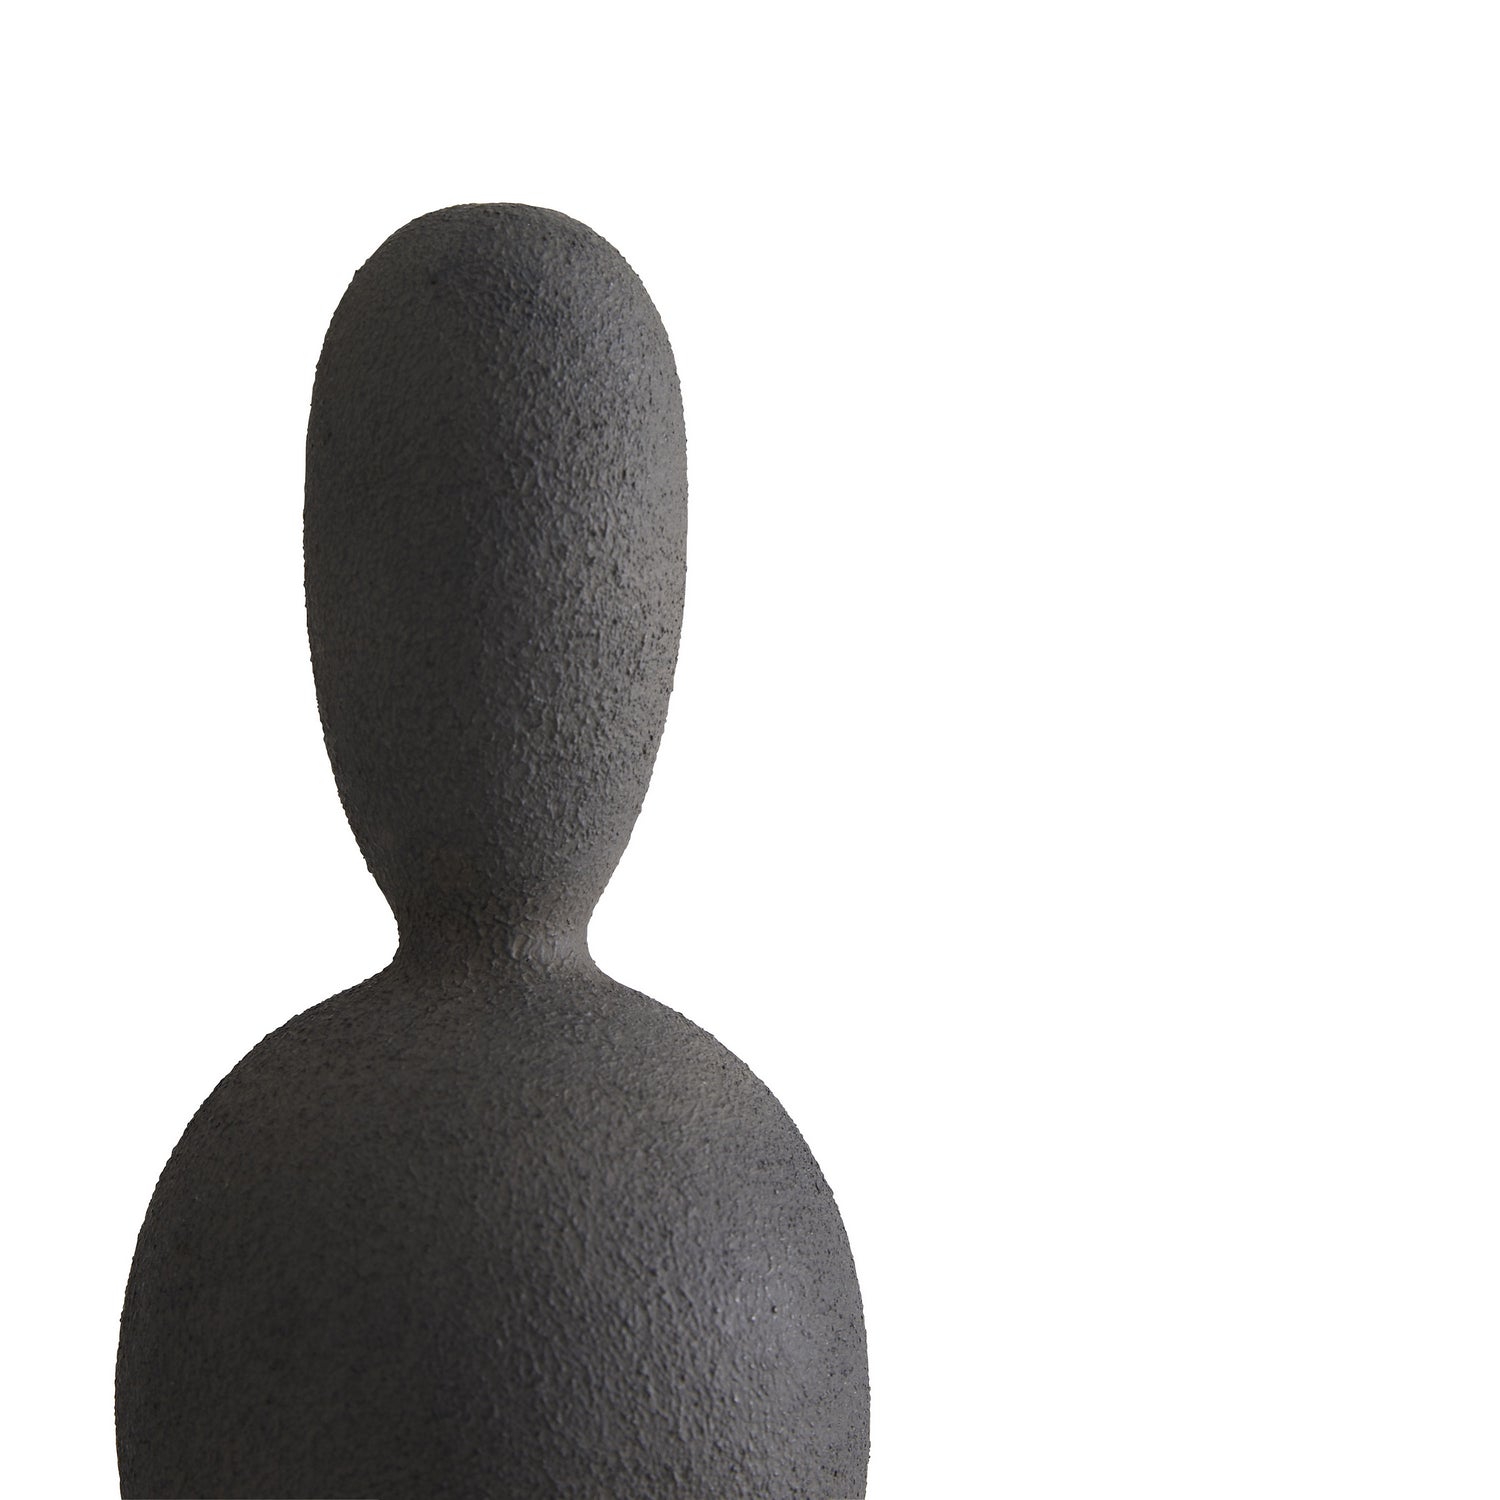 Sculpture from the Eddie collection in Charcoal finish